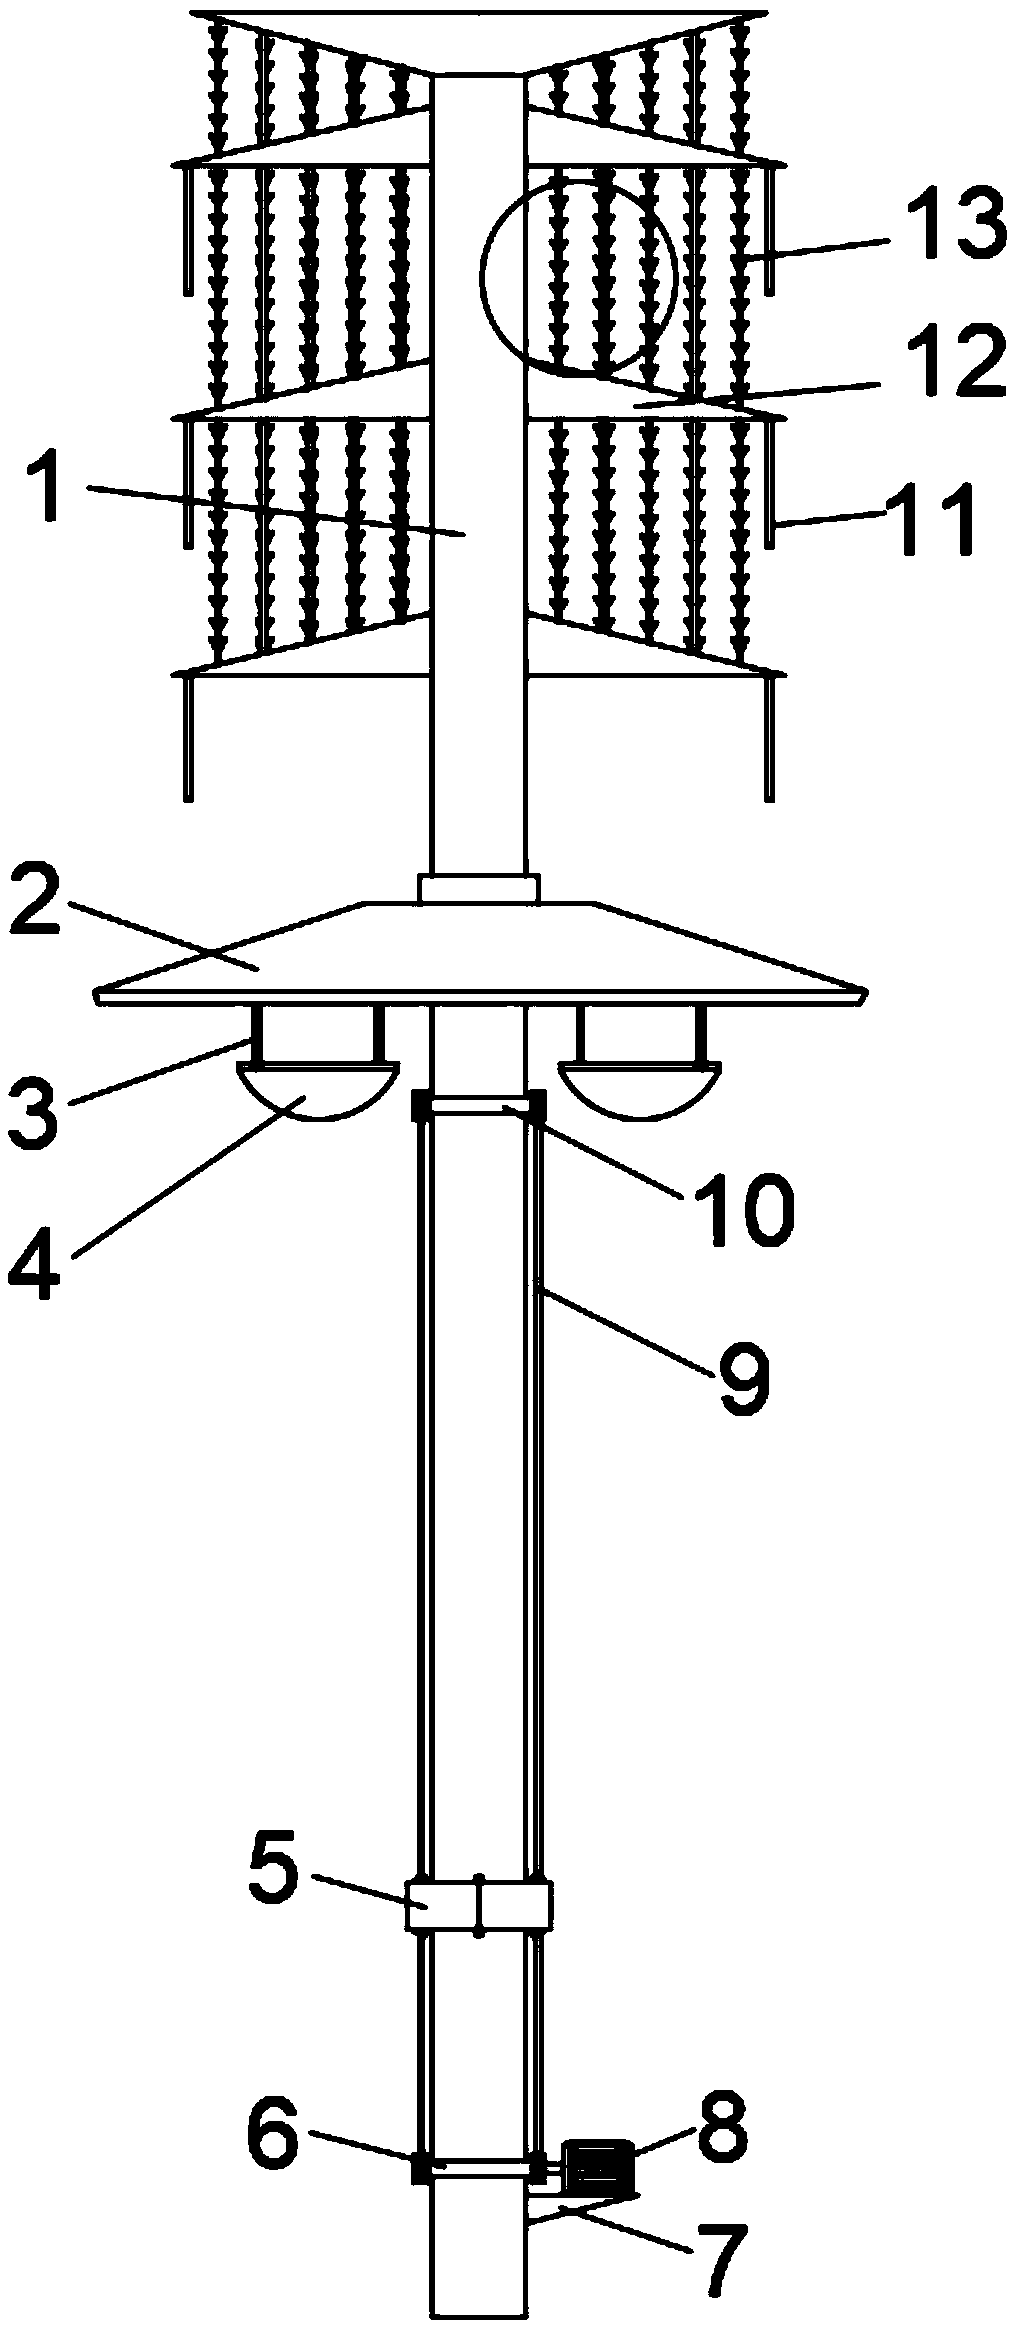 Electric power frame device provided with mechanism for birds to inhabit